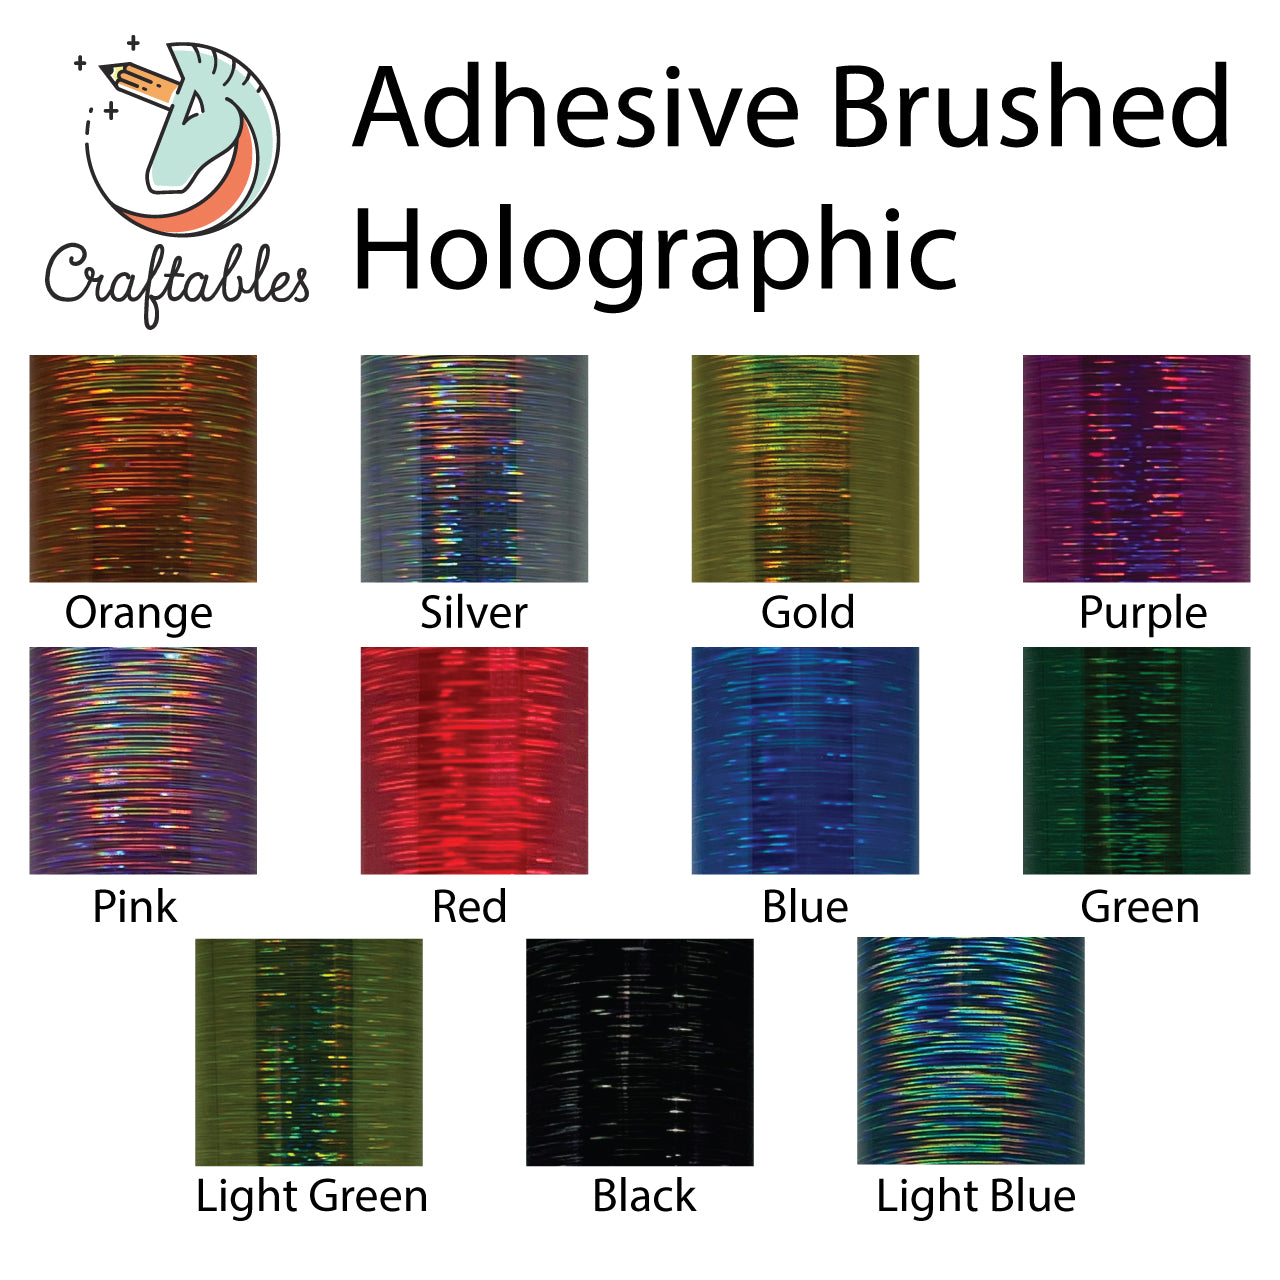 Purple Brushed Holographic Adhesive Vinyl Rolls By Craftables